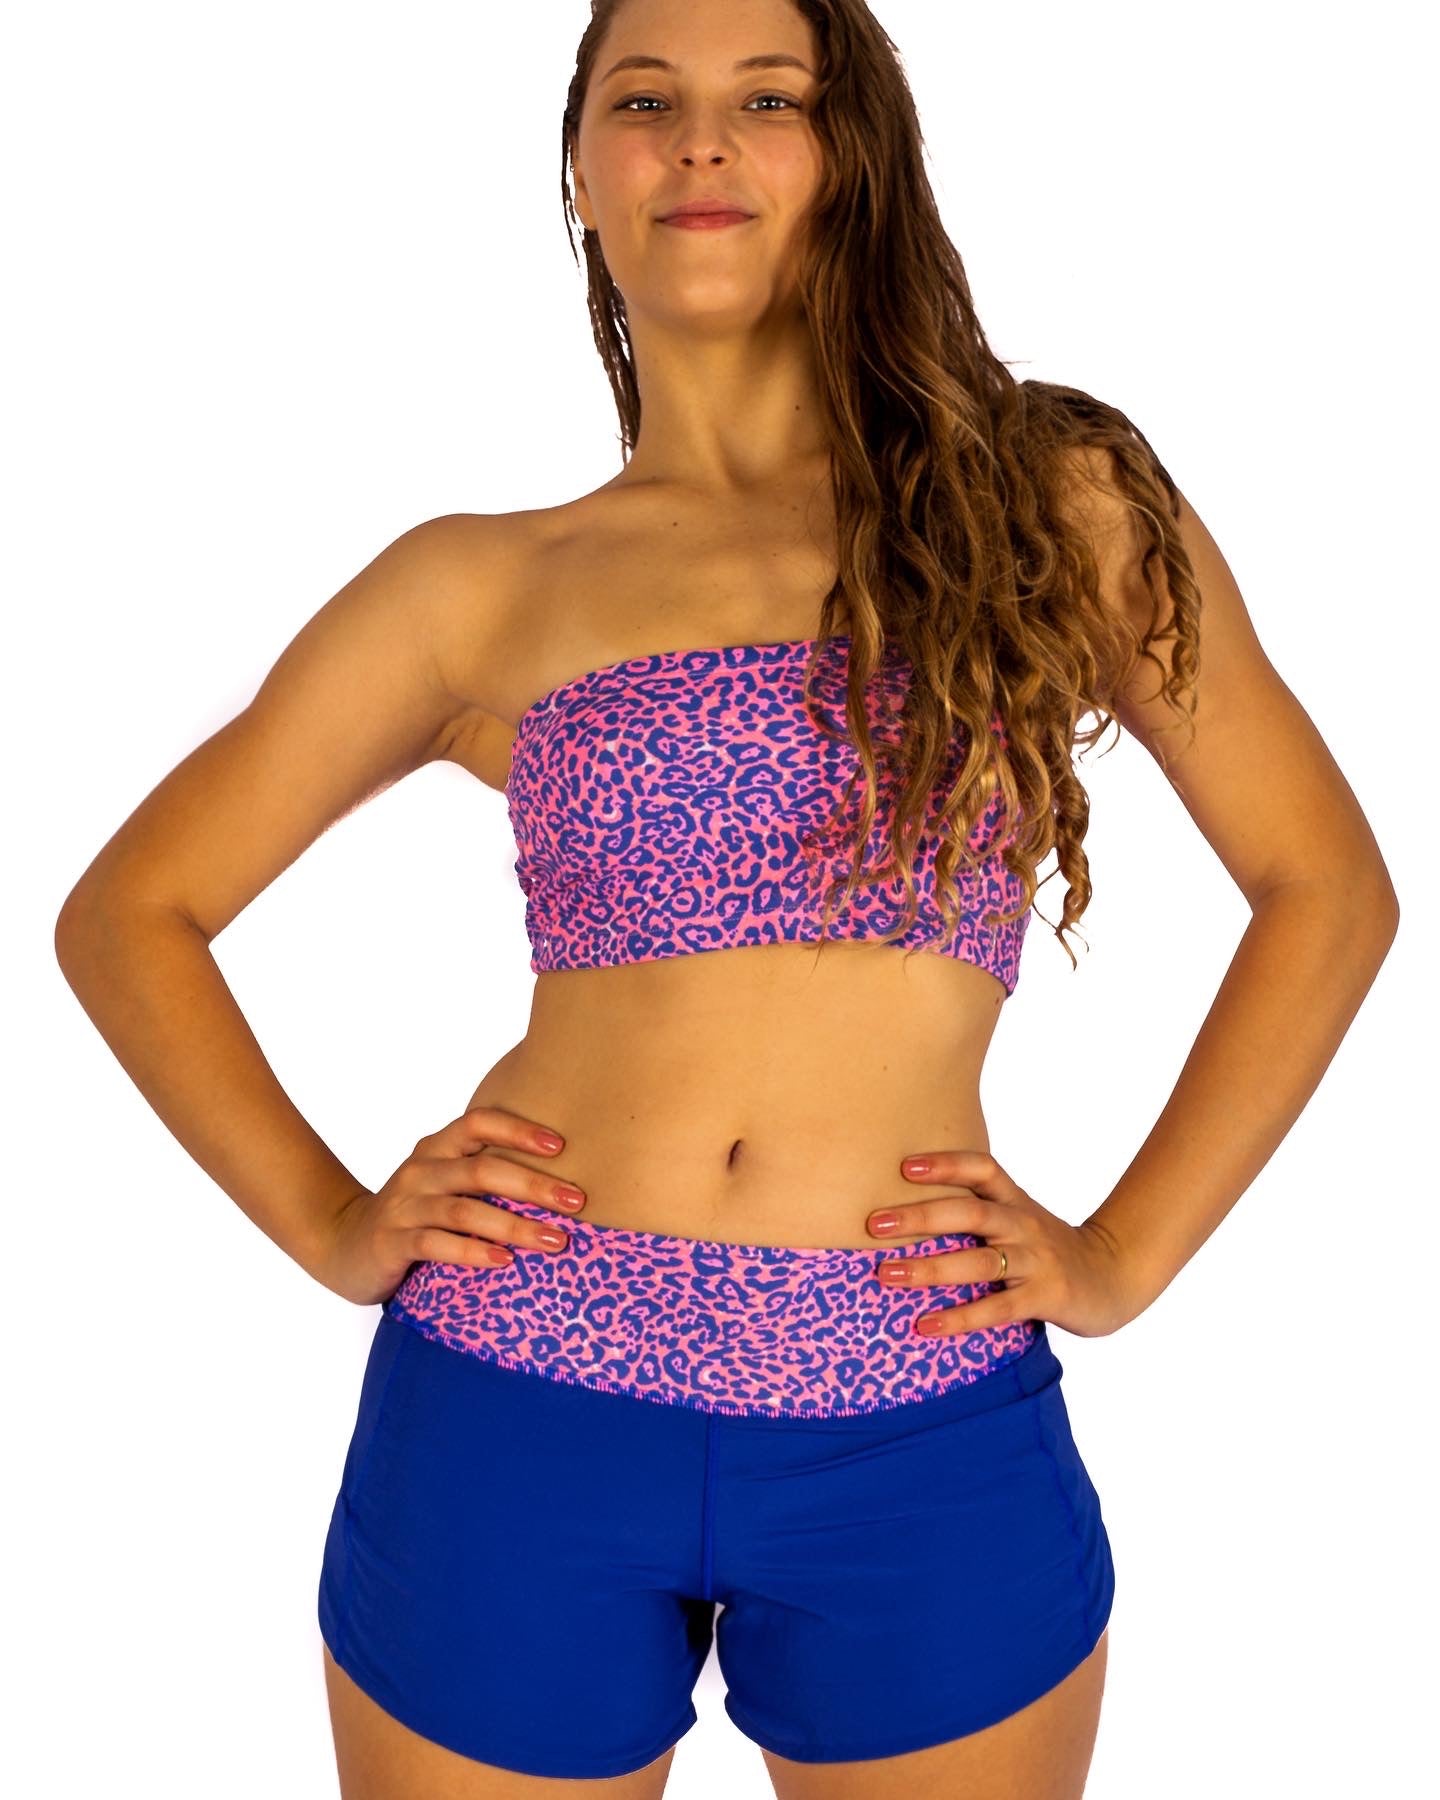 Running Shorts -  Purple and pink animal print on waist and under wear with pocket